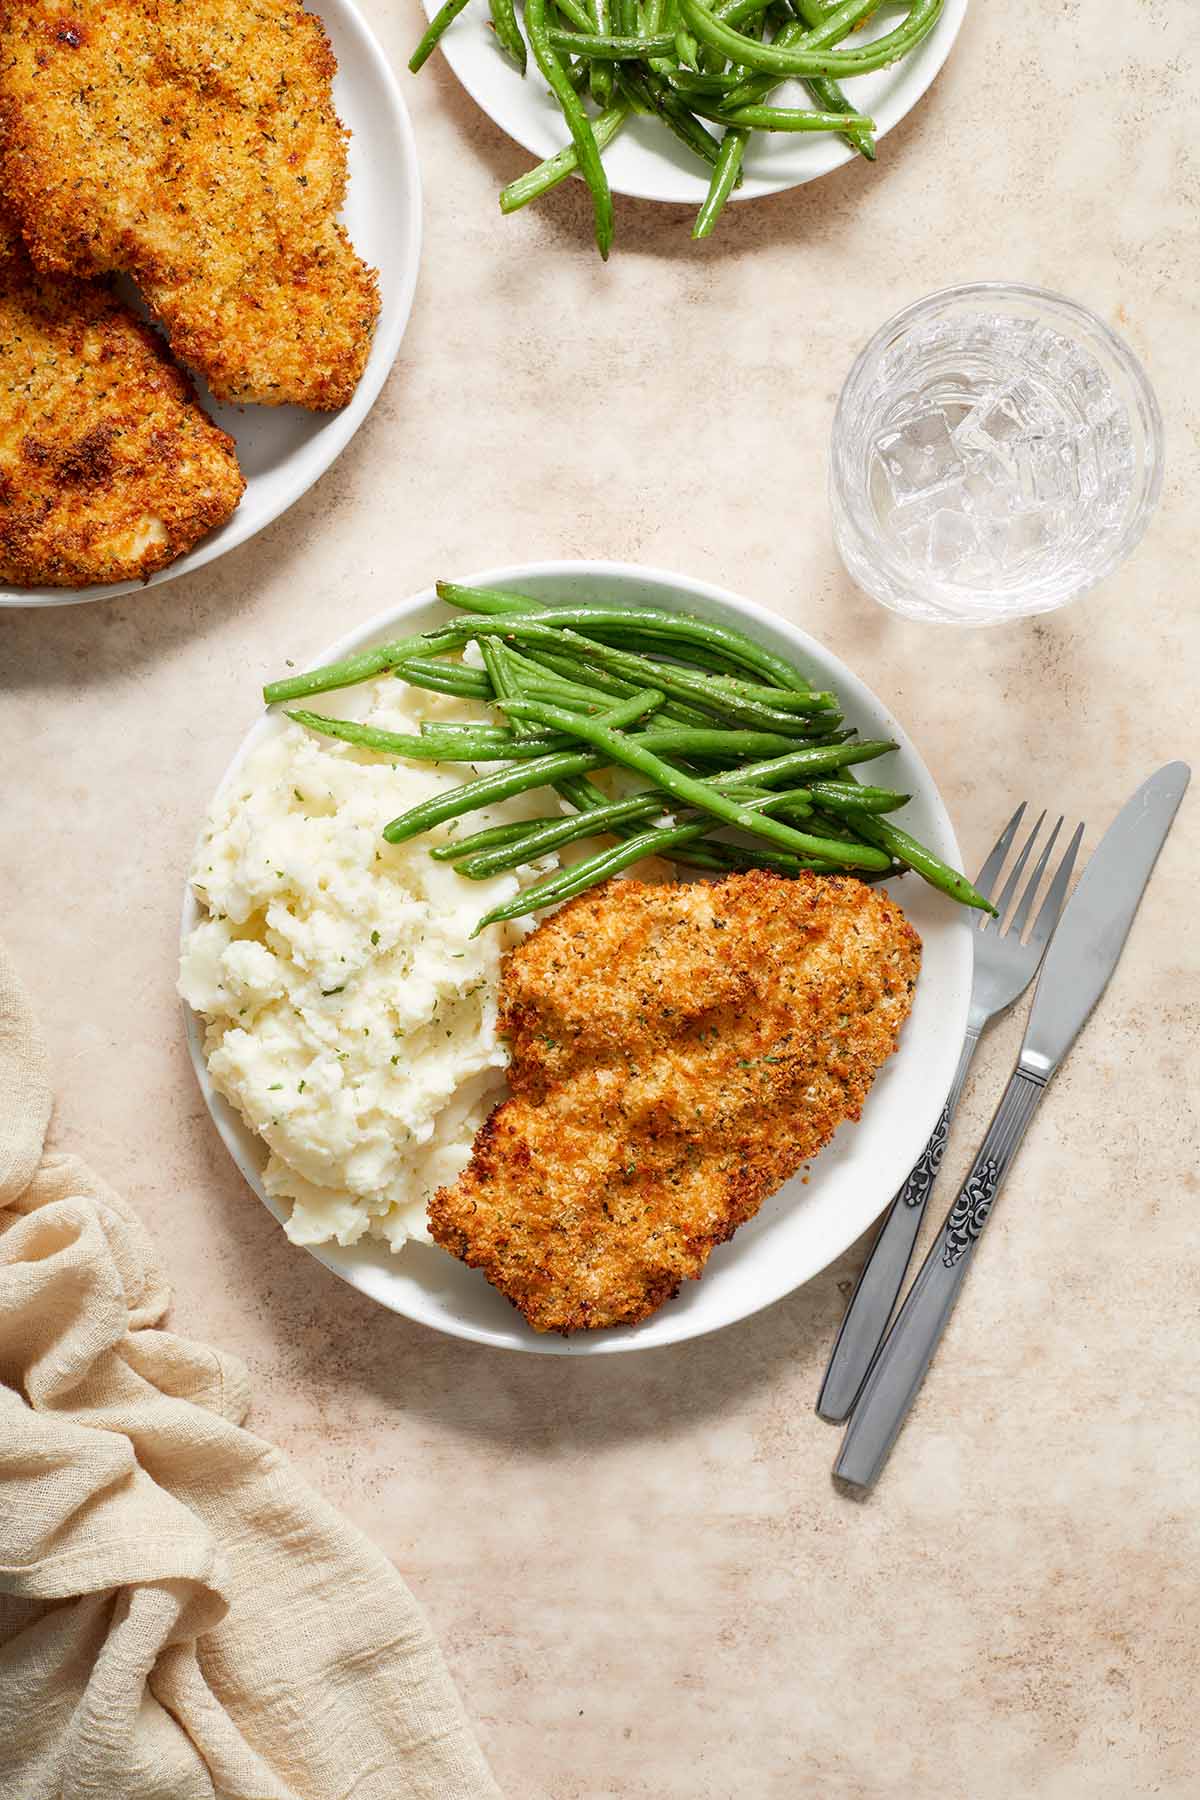 Overhead view of chicken schnitzel, mashed potatoes and green beans on a plate with plates of chicken and green beans off to the side.